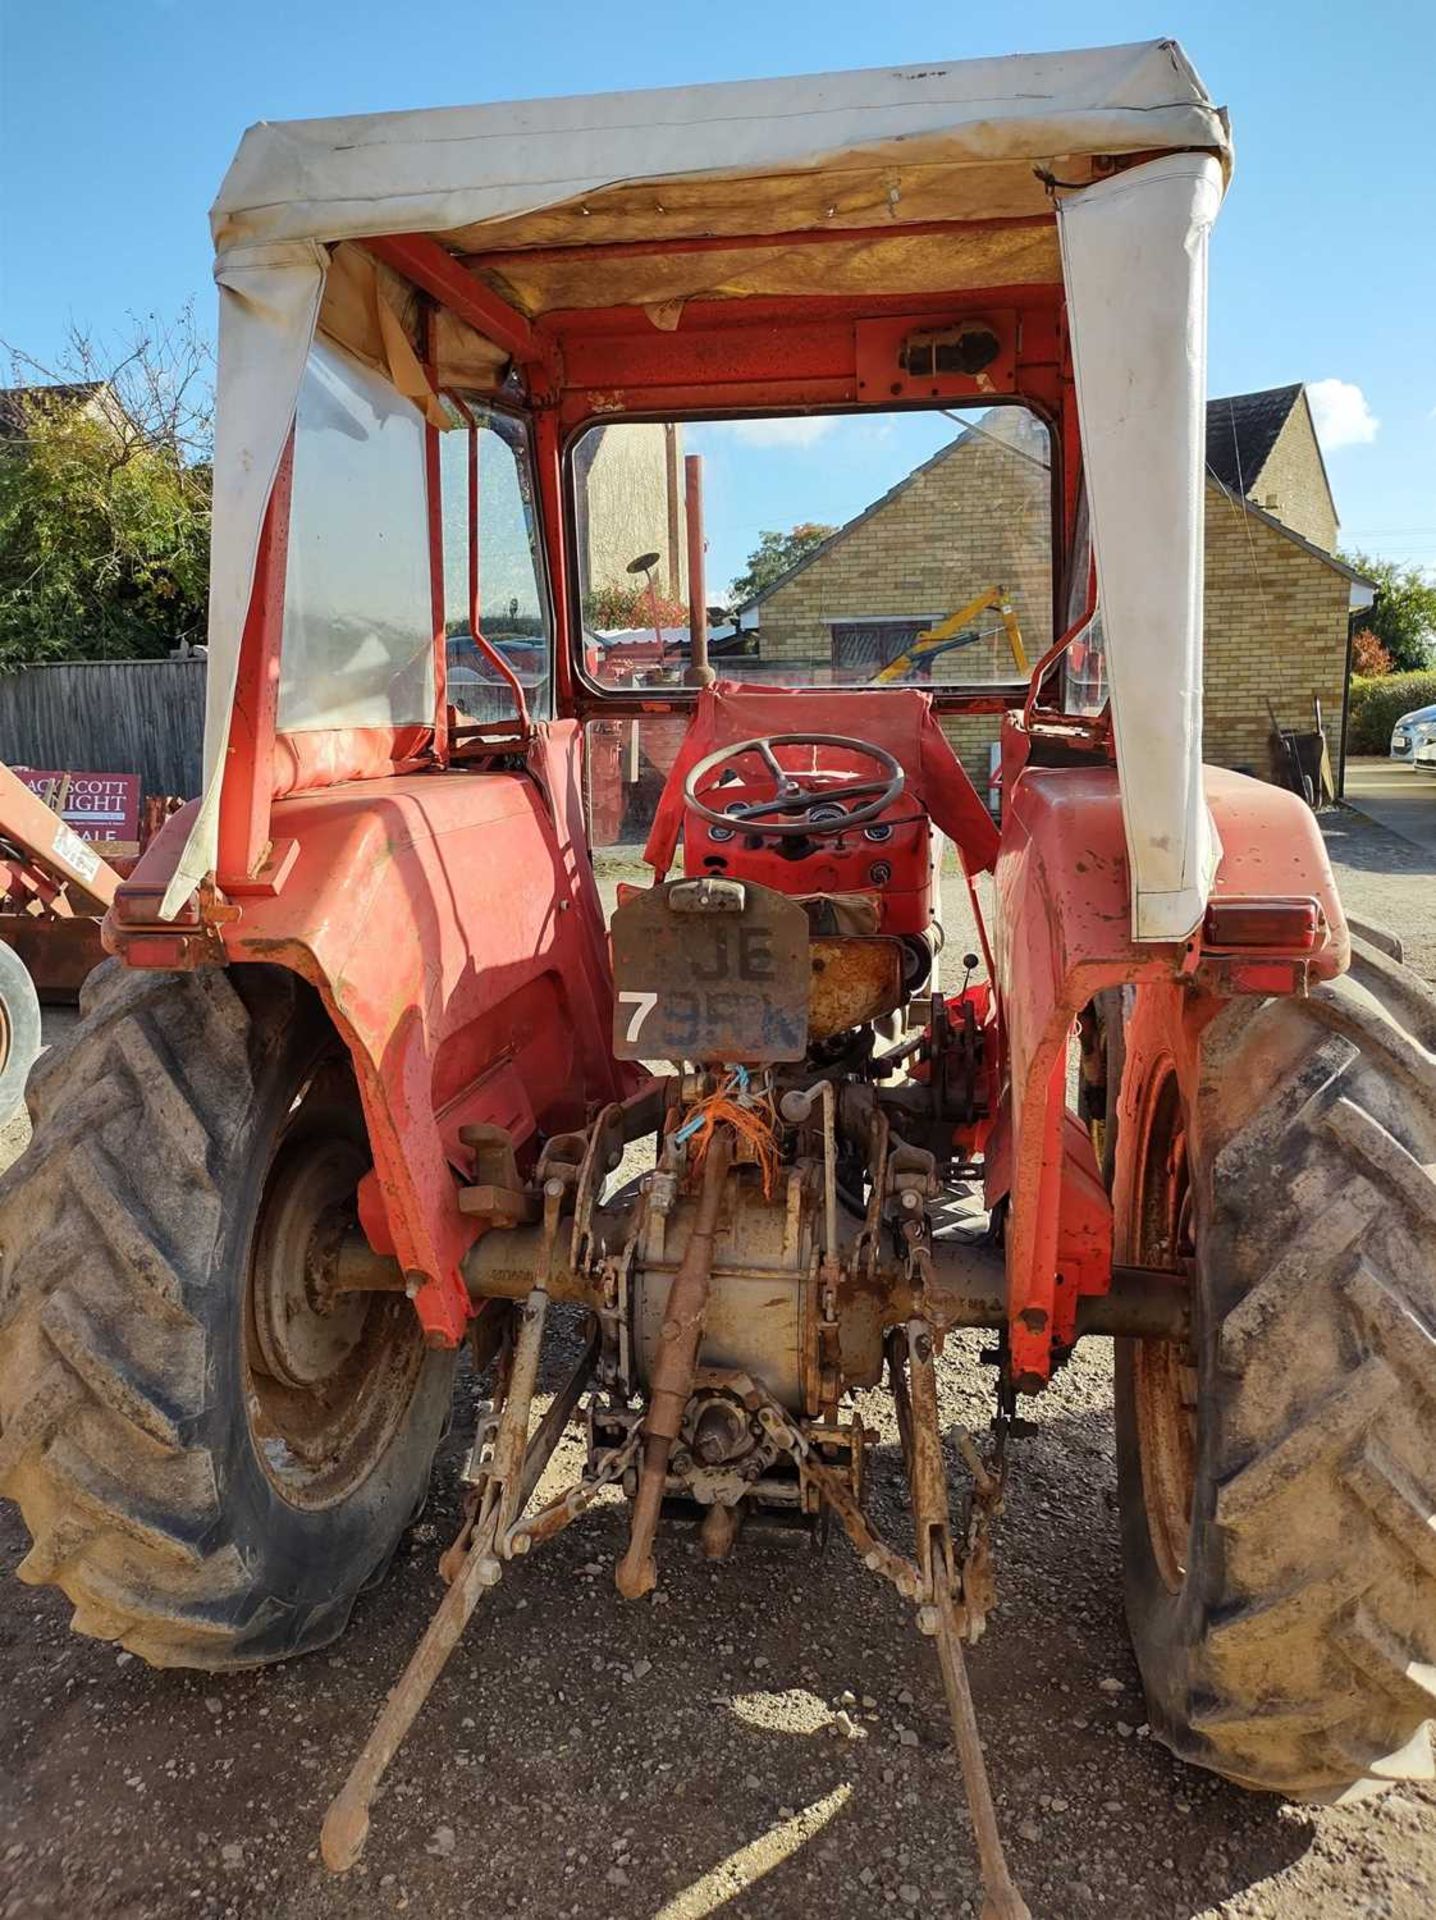 Massey Ferguson 135 Tractor with Original Front Wheels. Pickup Hitch. 2,284 Hrs. Reg: 7JE 705X - Image 5 of 10